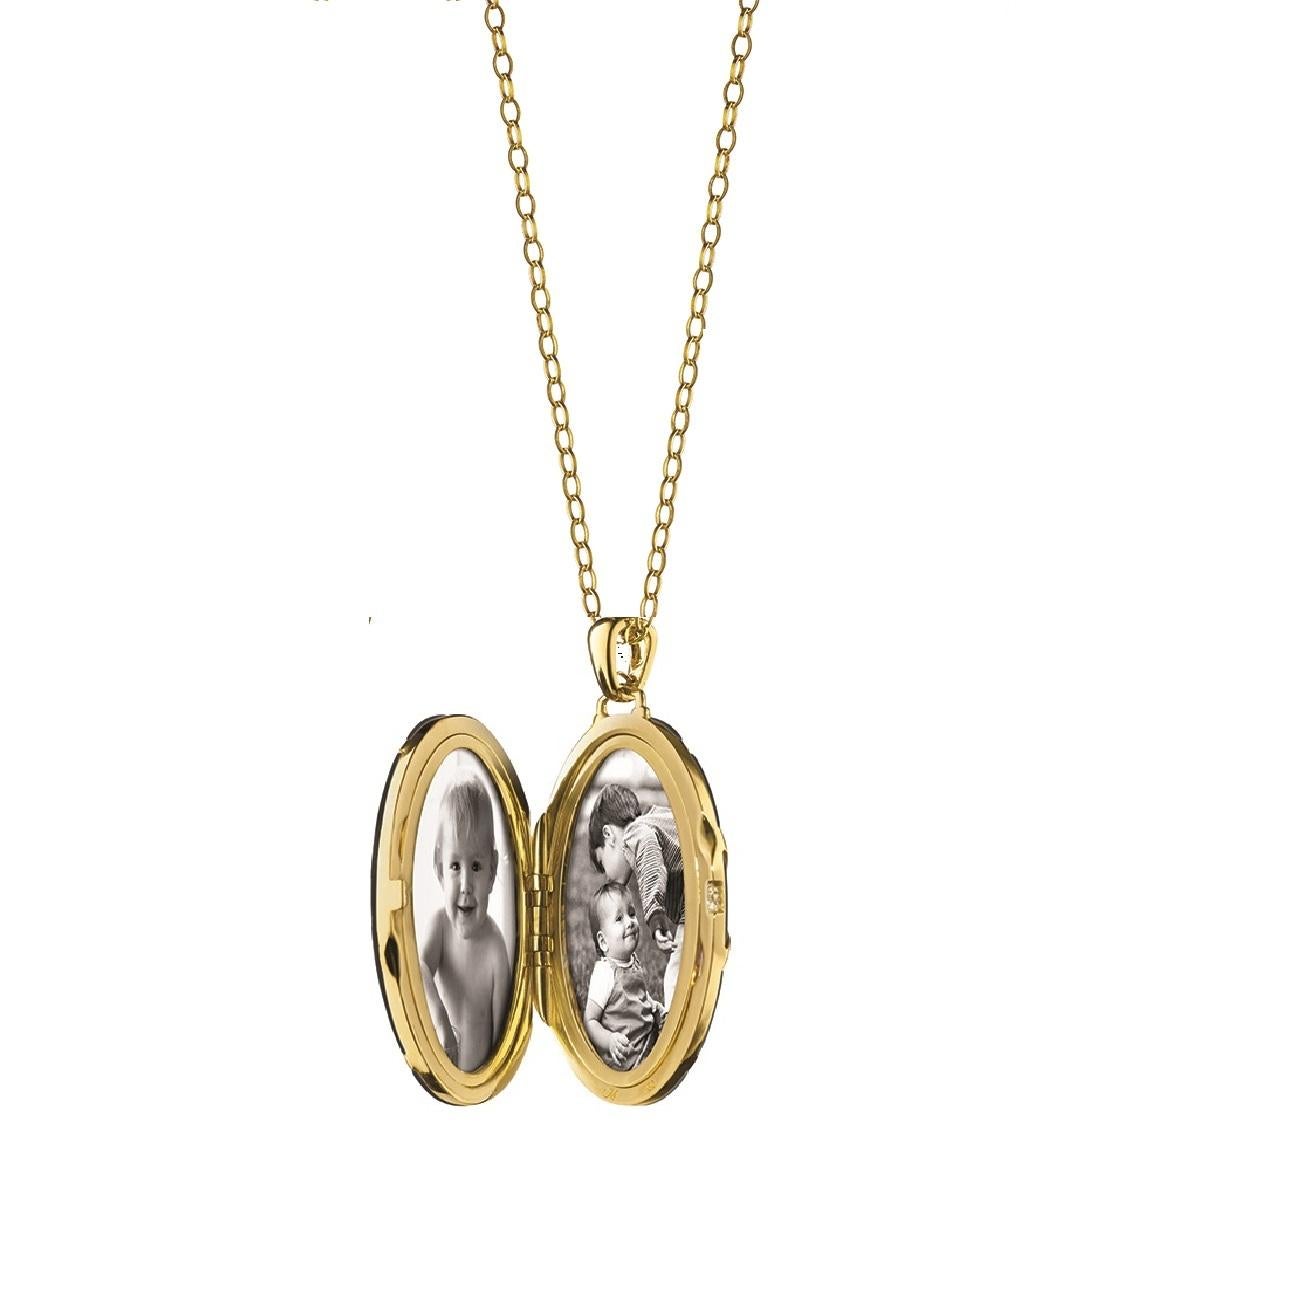 This elegant Monica Rich Kosann 18K Yellow Gold Diamond Stripe Oval Locket with Black Ceramic features a diamond stripe on the front of the locket and is presented on a gold 32 open link chain. 

MRK2100- in Ceramic and 18K Gold- Represents the